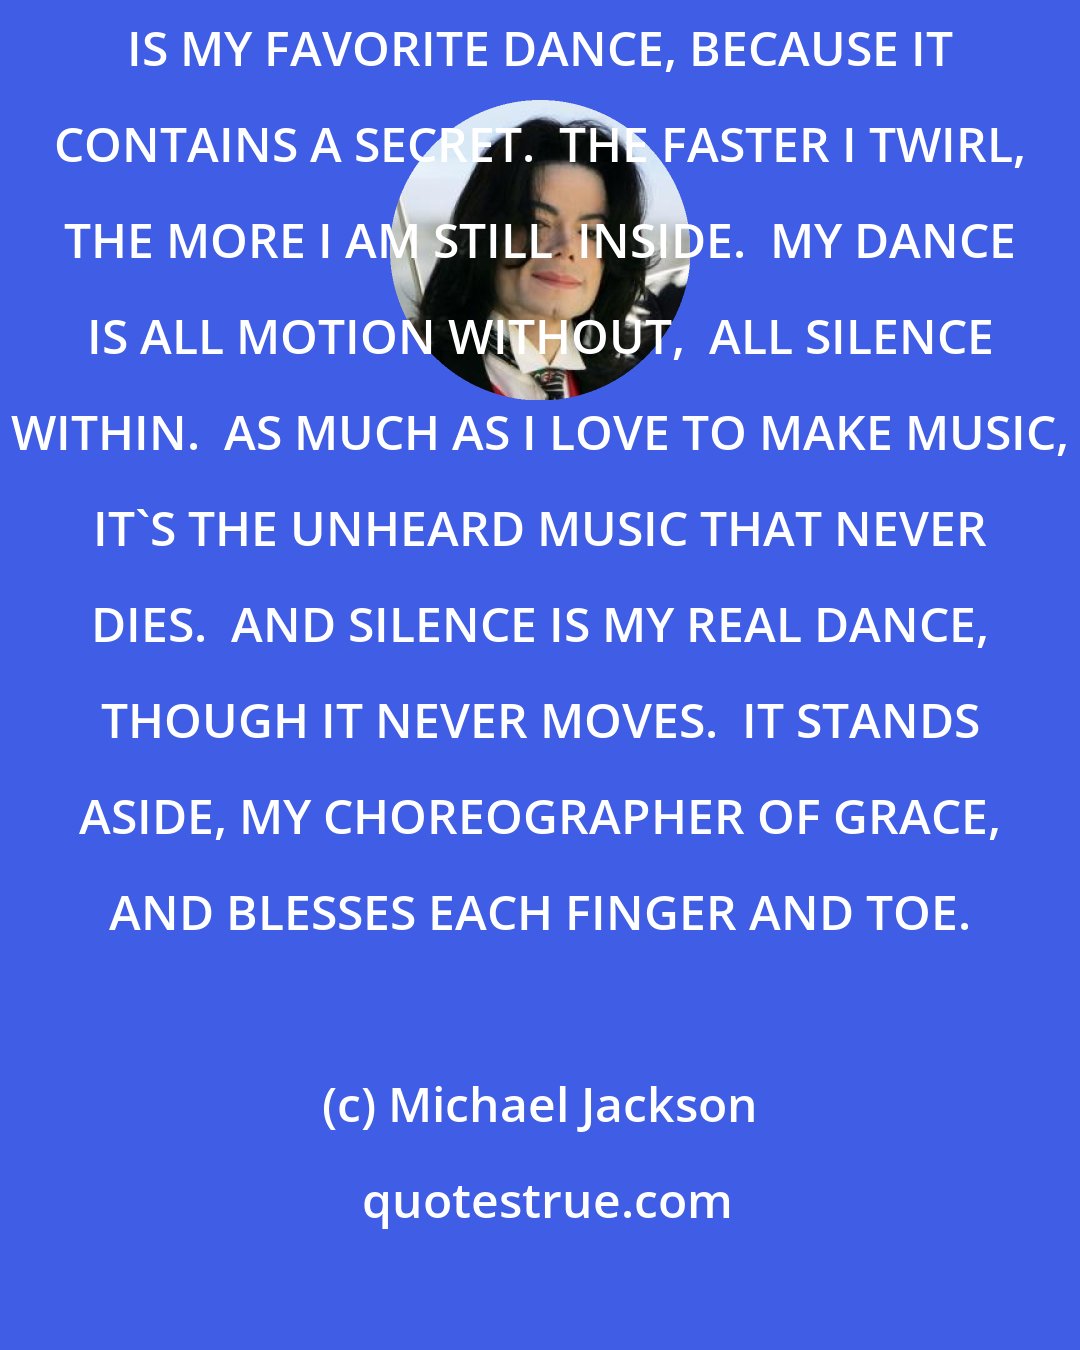 Michael Jackson: GRINNING, DUCKING MY HEAD FOR BALANCE, I START TO SPIN WILDLY AS I CAN.  THAT IS MY FAVORITE DANCE, BECAUSE IT CONTAINS A SECRET.  THE FASTER I TWIRL, THE MORE I AM STILL  INSIDE.  MY DANCE IS ALL MOTION WITHOUT,  ALL SILENCE WITHIN.  AS MUCH AS I LOVE TO MAKE MUSIC, IT'S THE UNHEARD MUSIC THAT NEVER DIES.  AND SILENCE IS MY REAL DANCE, THOUGH IT NEVER MOVES.  IT STANDS ASIDE, MY CHOREOGRAPHER OF GRACE, AND BLESSES EACH FINGER AND TOE.